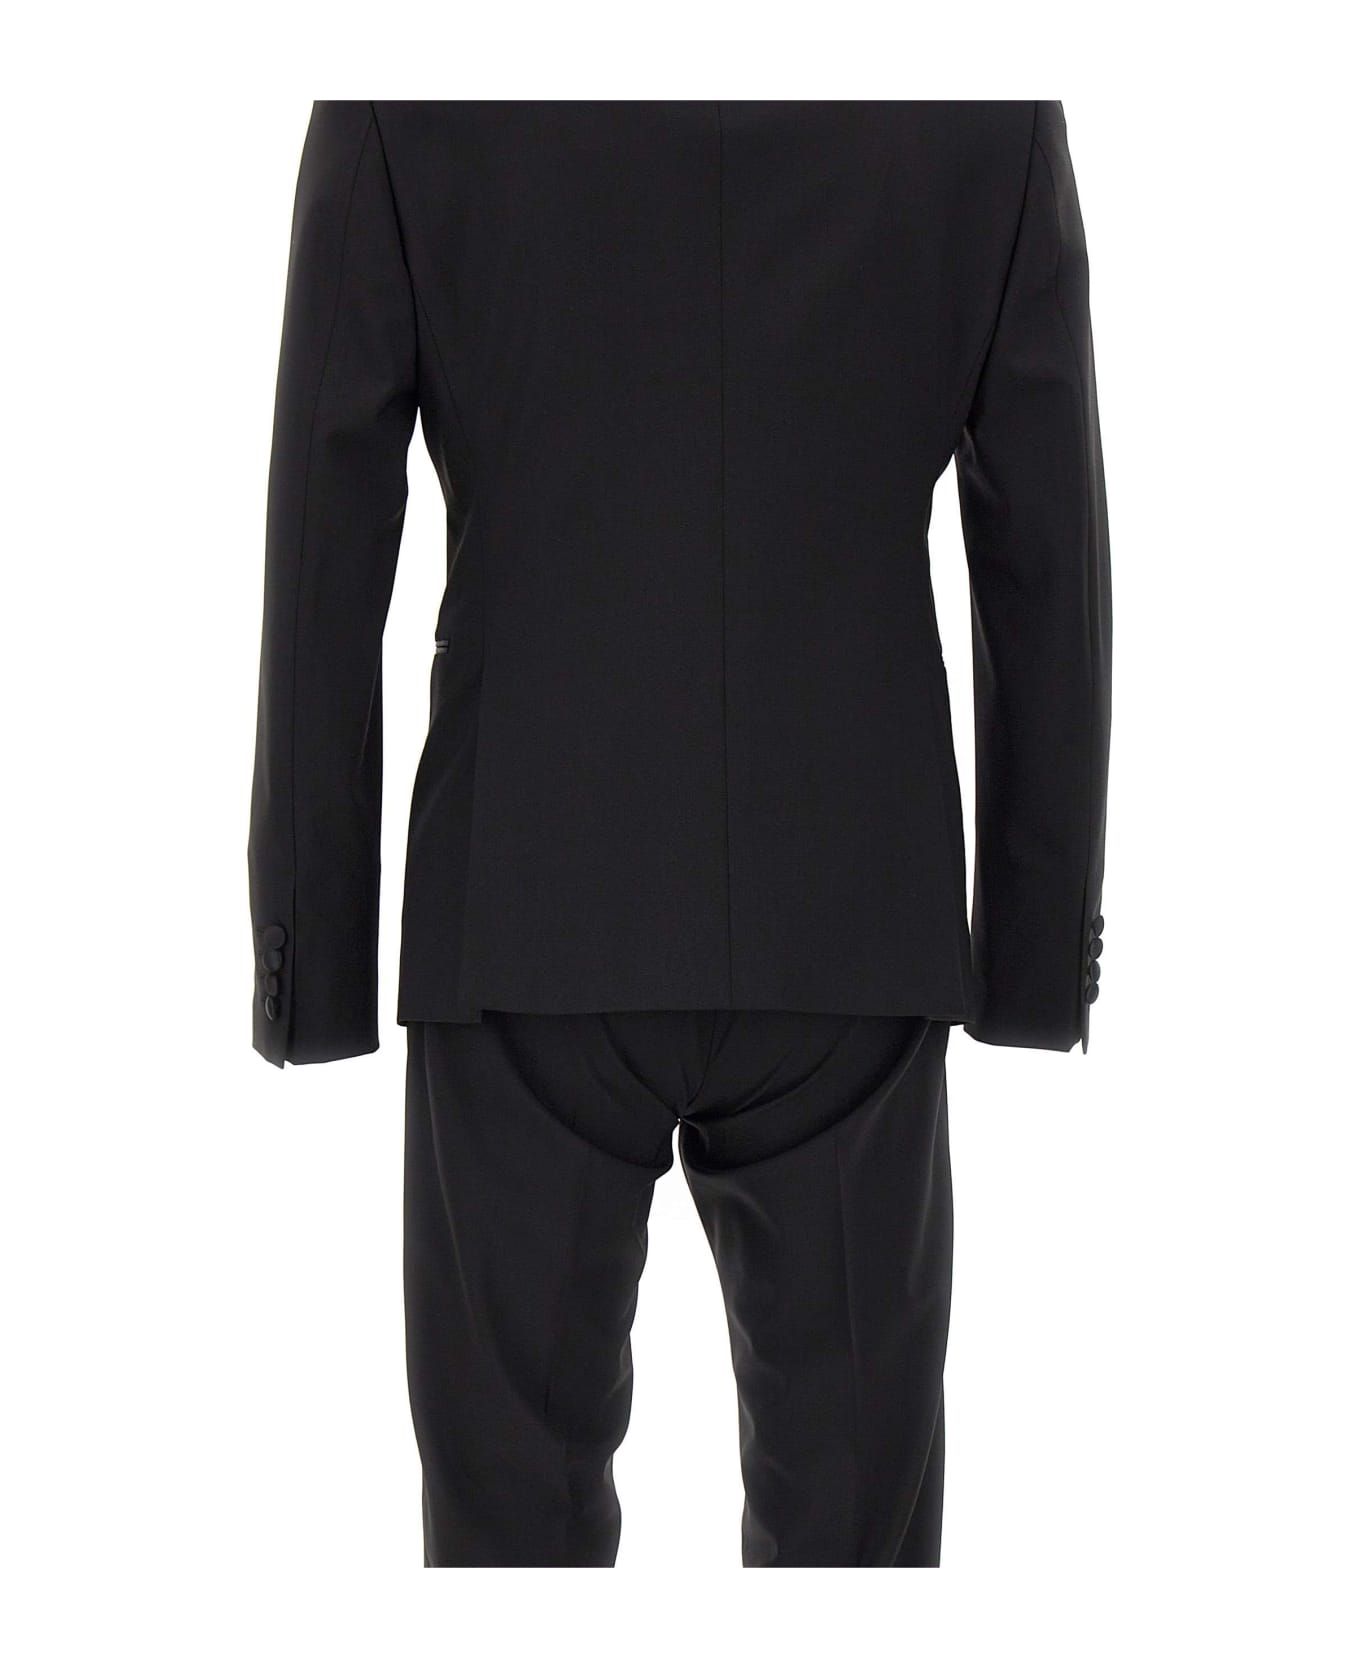 Emporio Armani Cool Wool Two-piece Formal Suit - BLACK